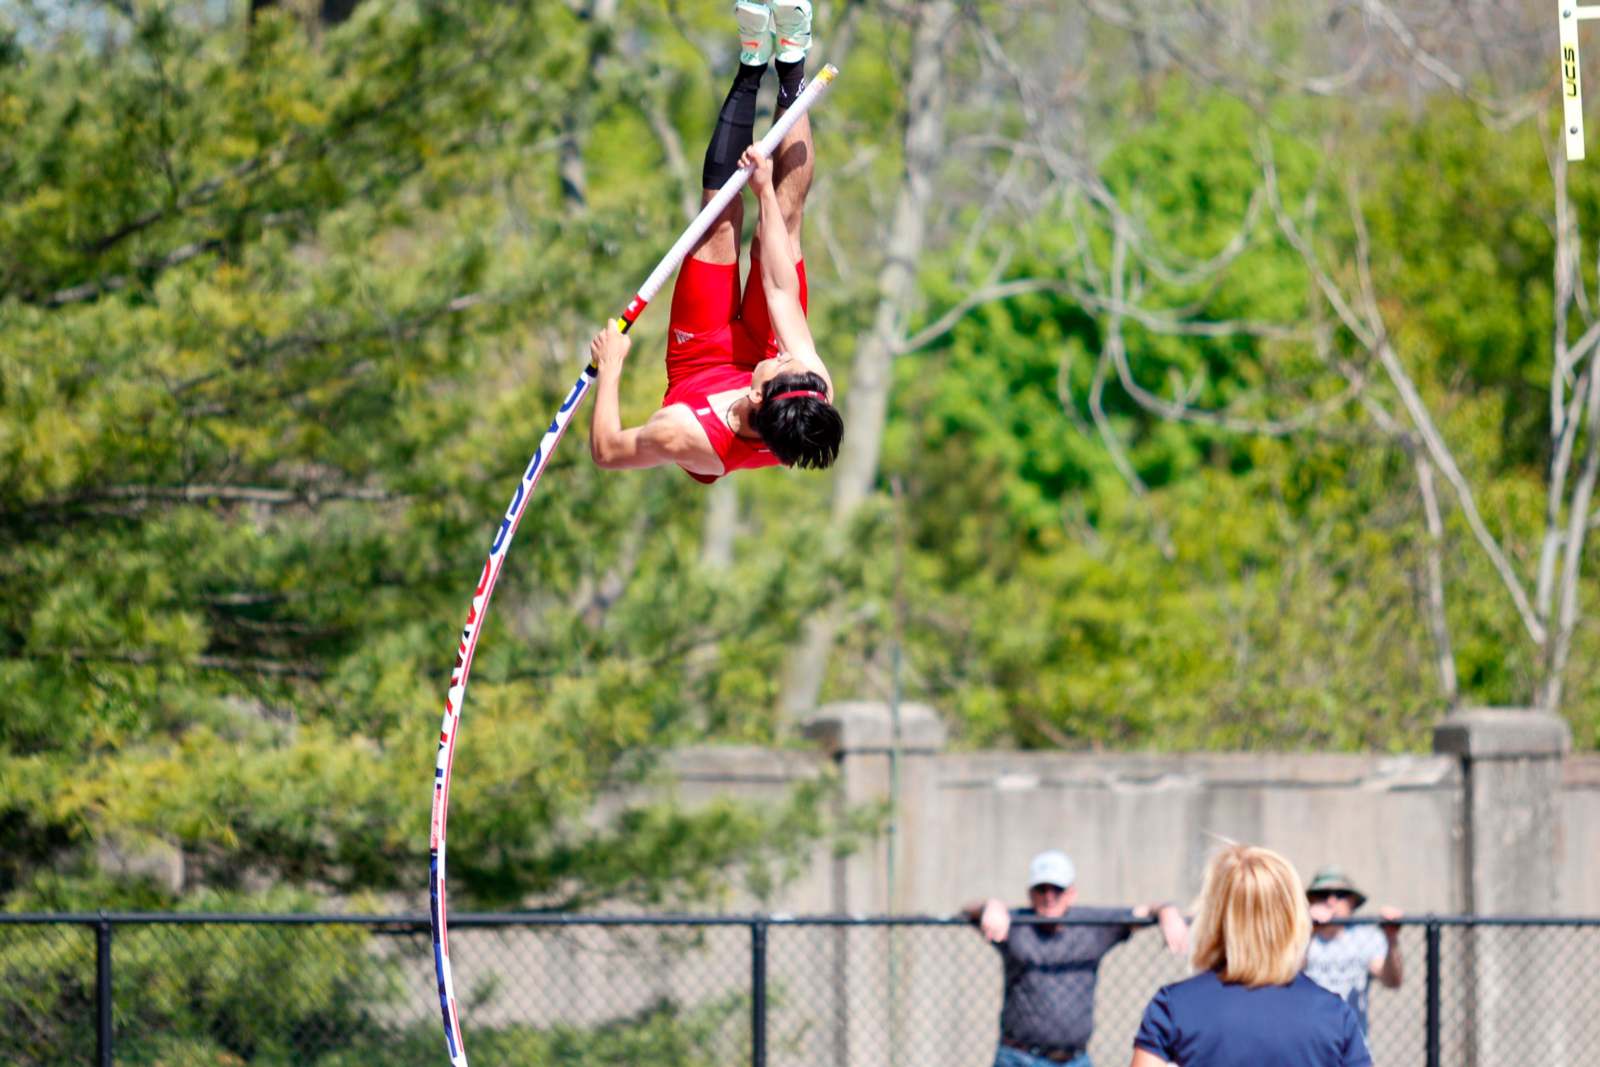 a man in red shirt jumping over a pole